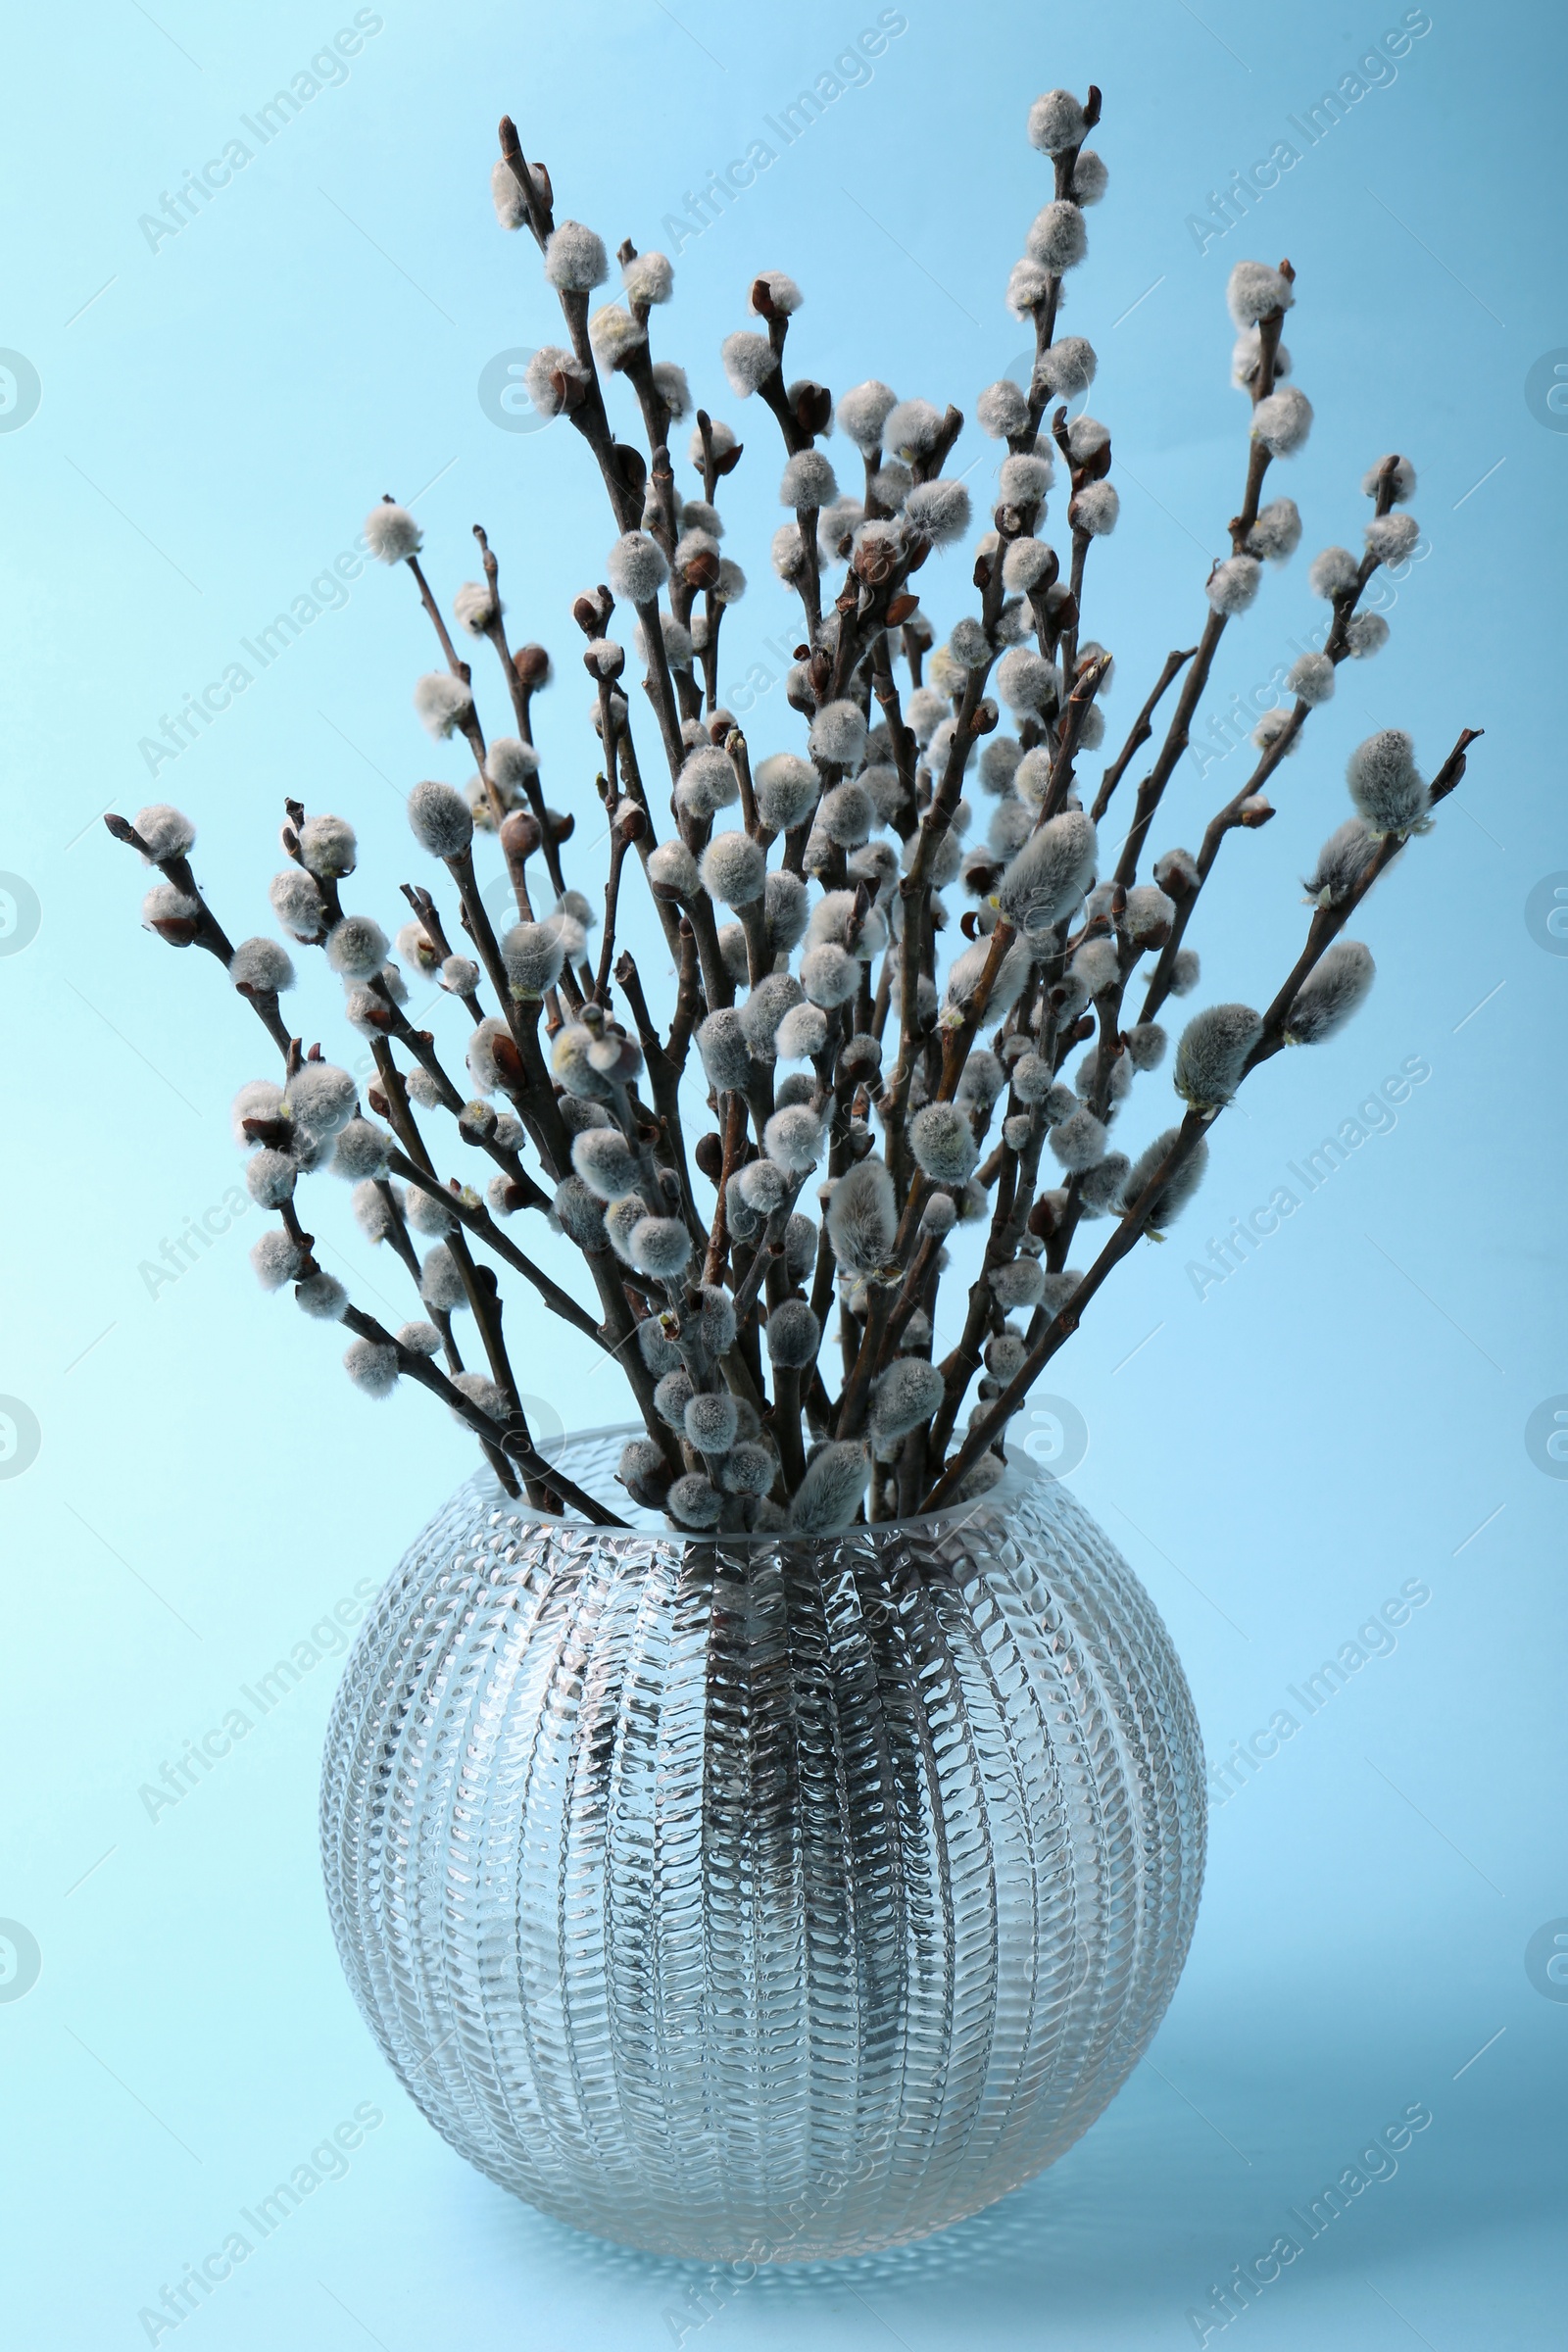 Photo of Vase with beautiful blooming willow branches on light blue background